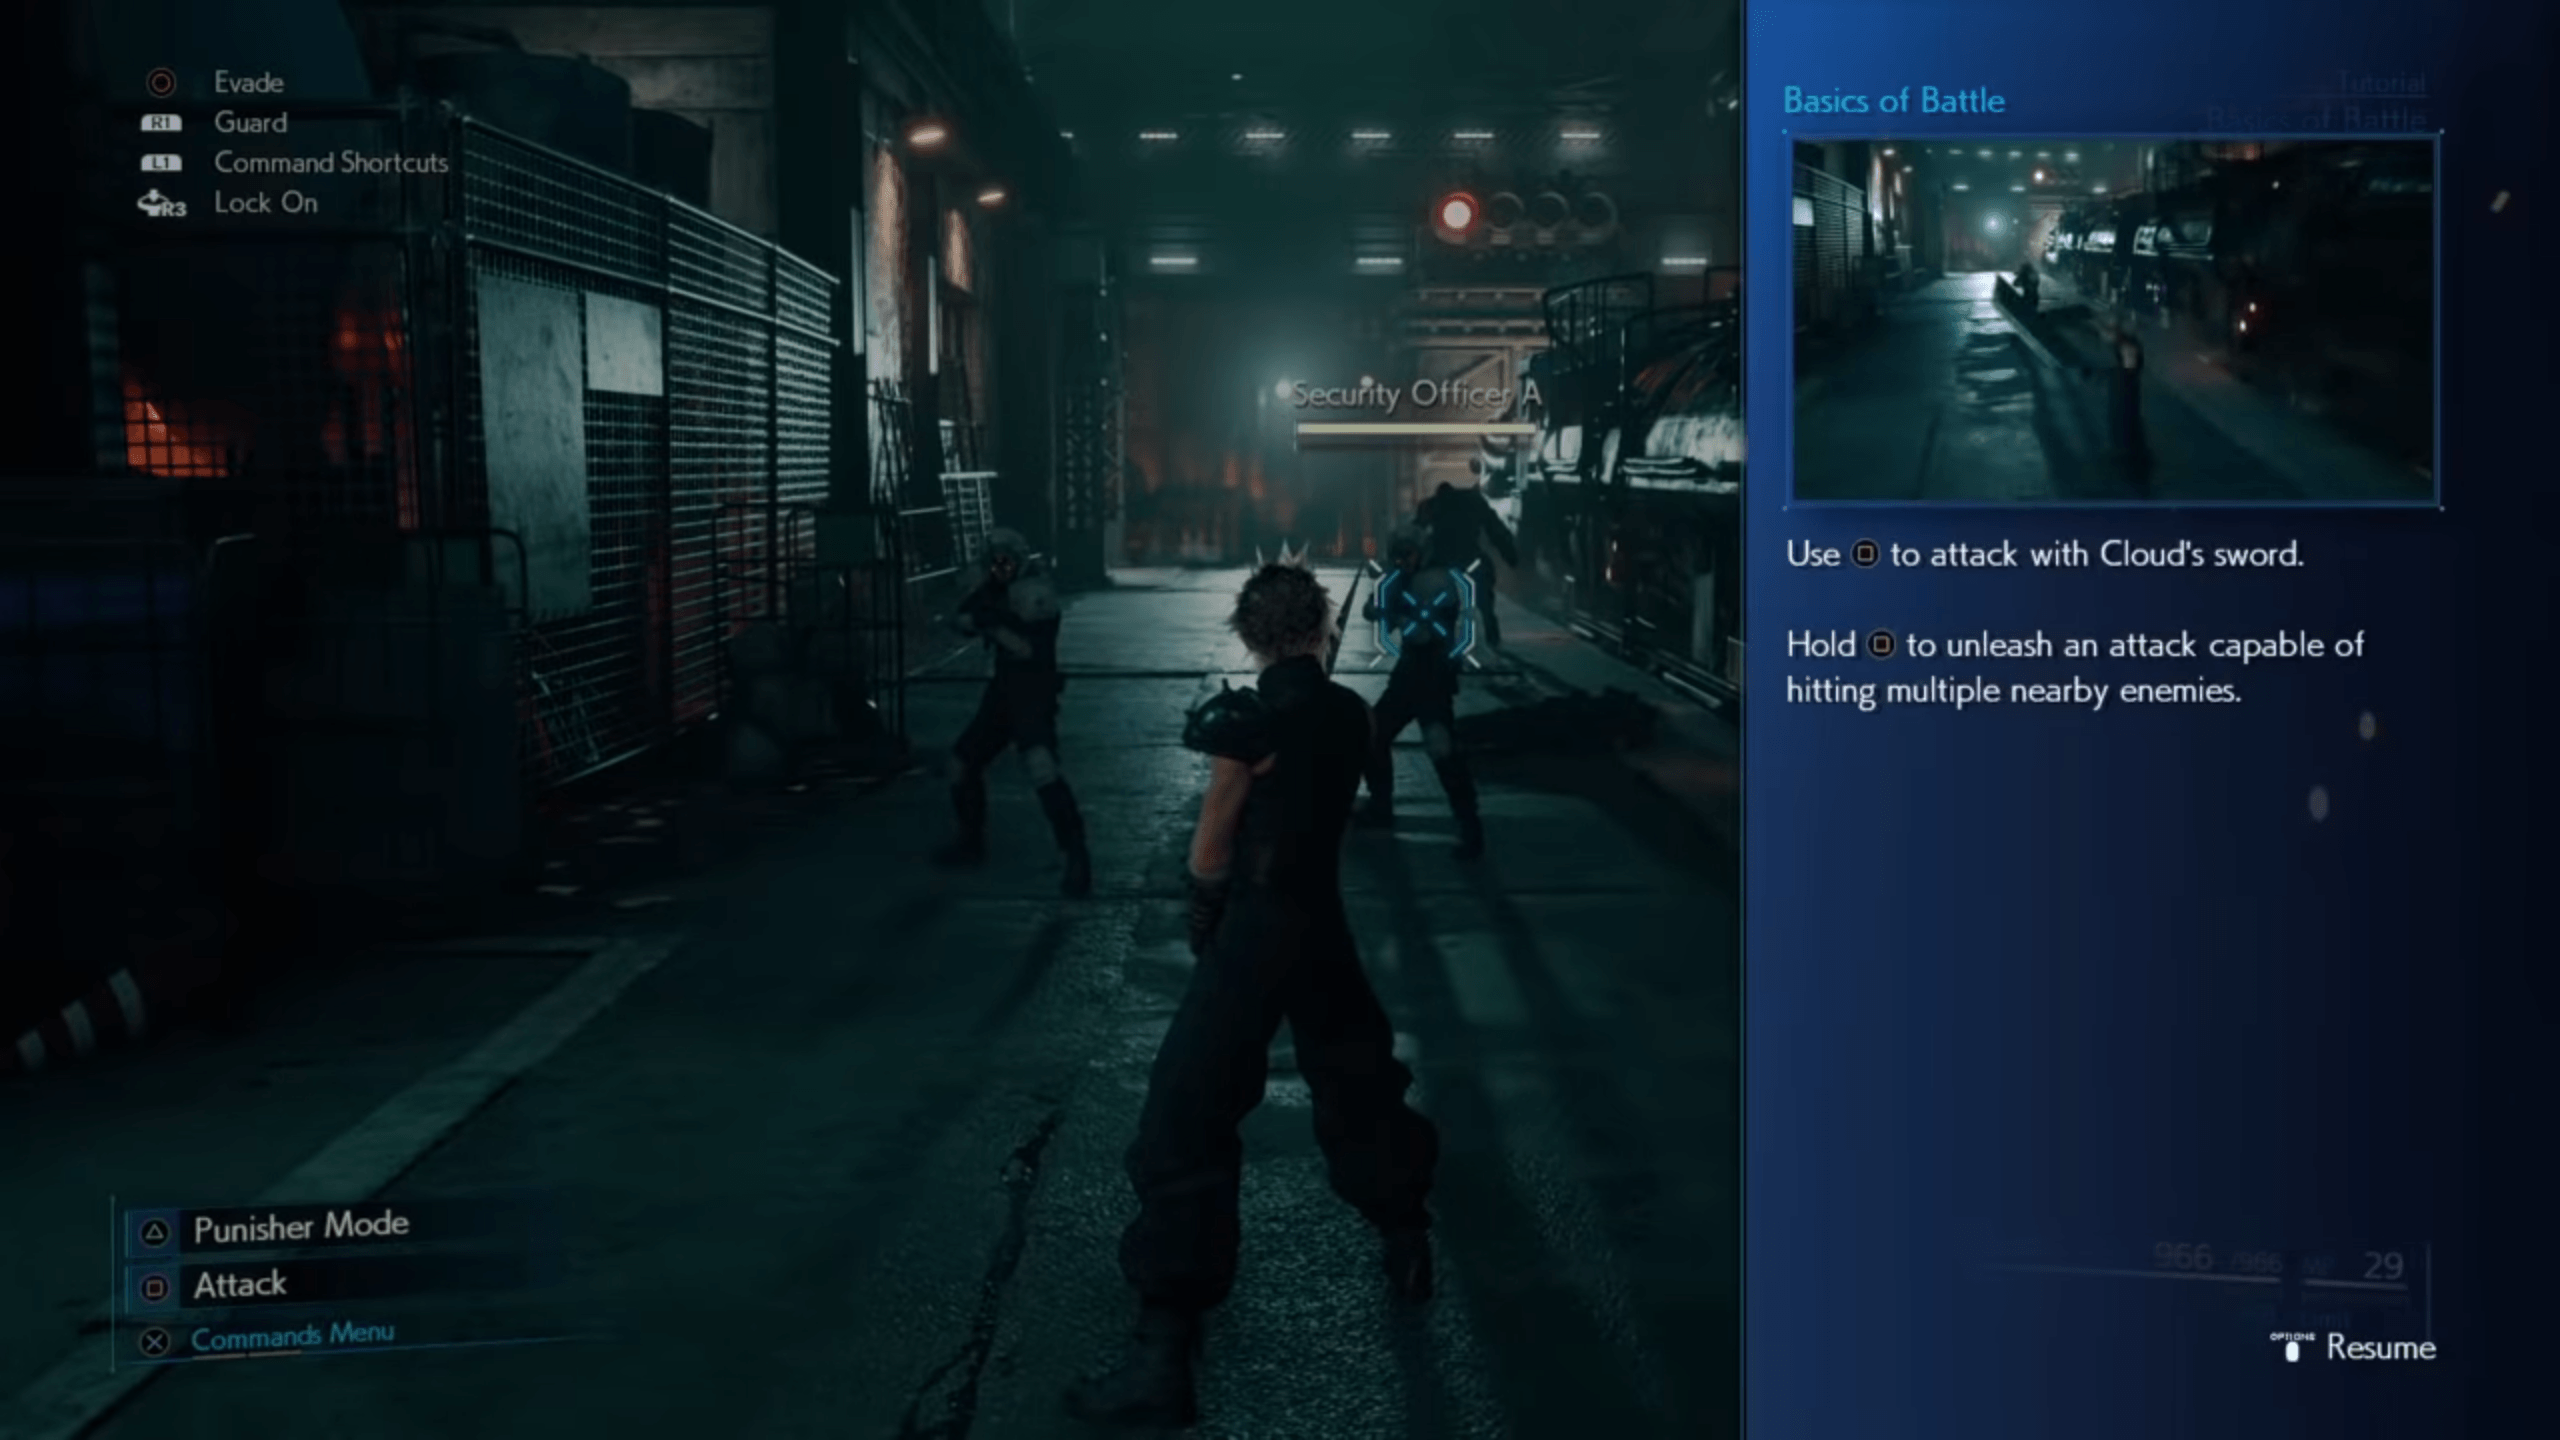 Final Fantasy VII Remake demo has leaked, is packed with teases